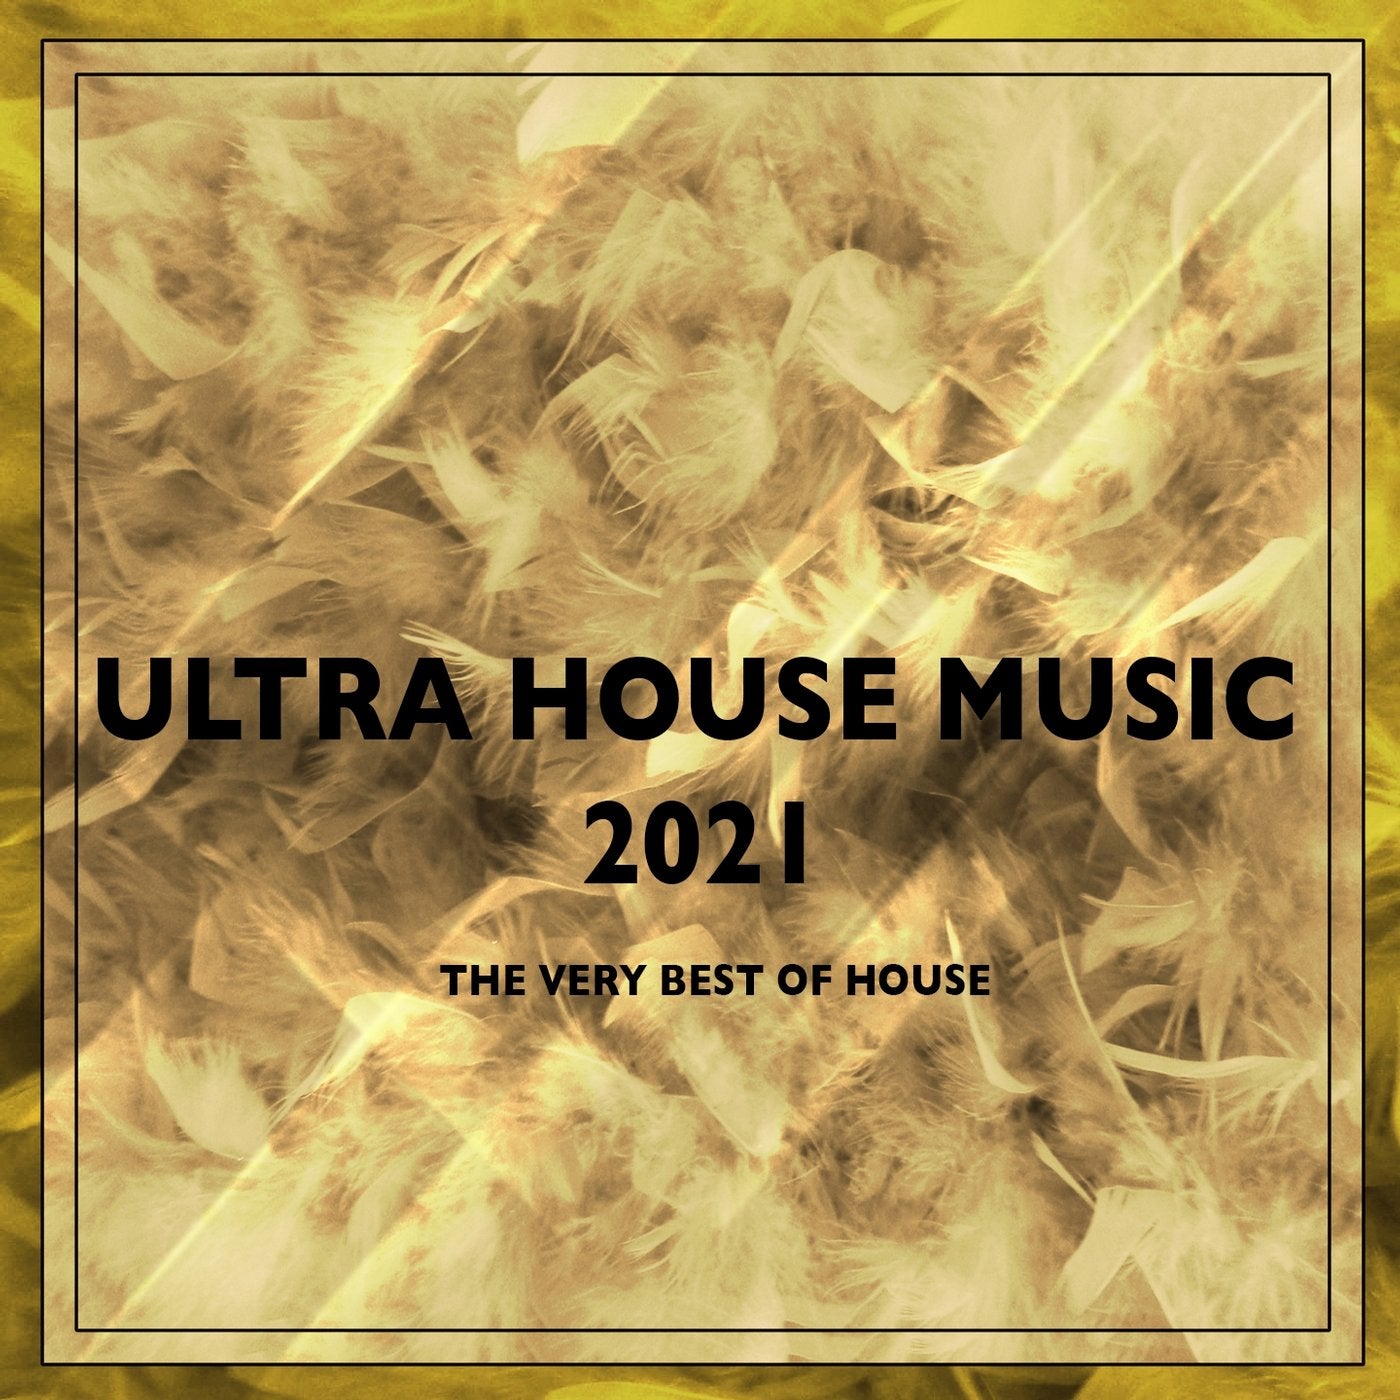 ULTRA HOUSE MUSIC 2021 (The very best of sound)